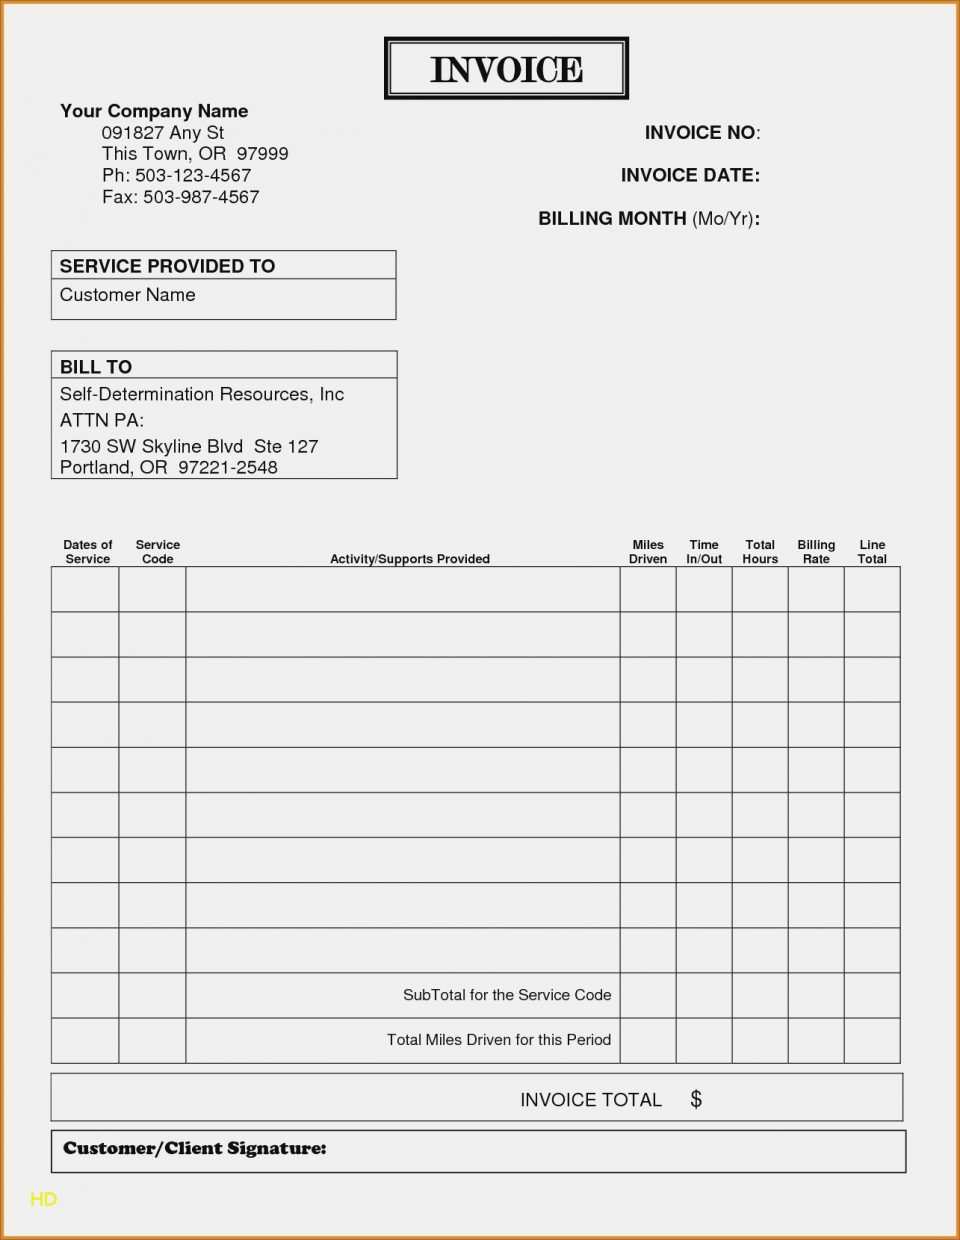 Lawn Service Invoice Template Excel from legaldbol.com